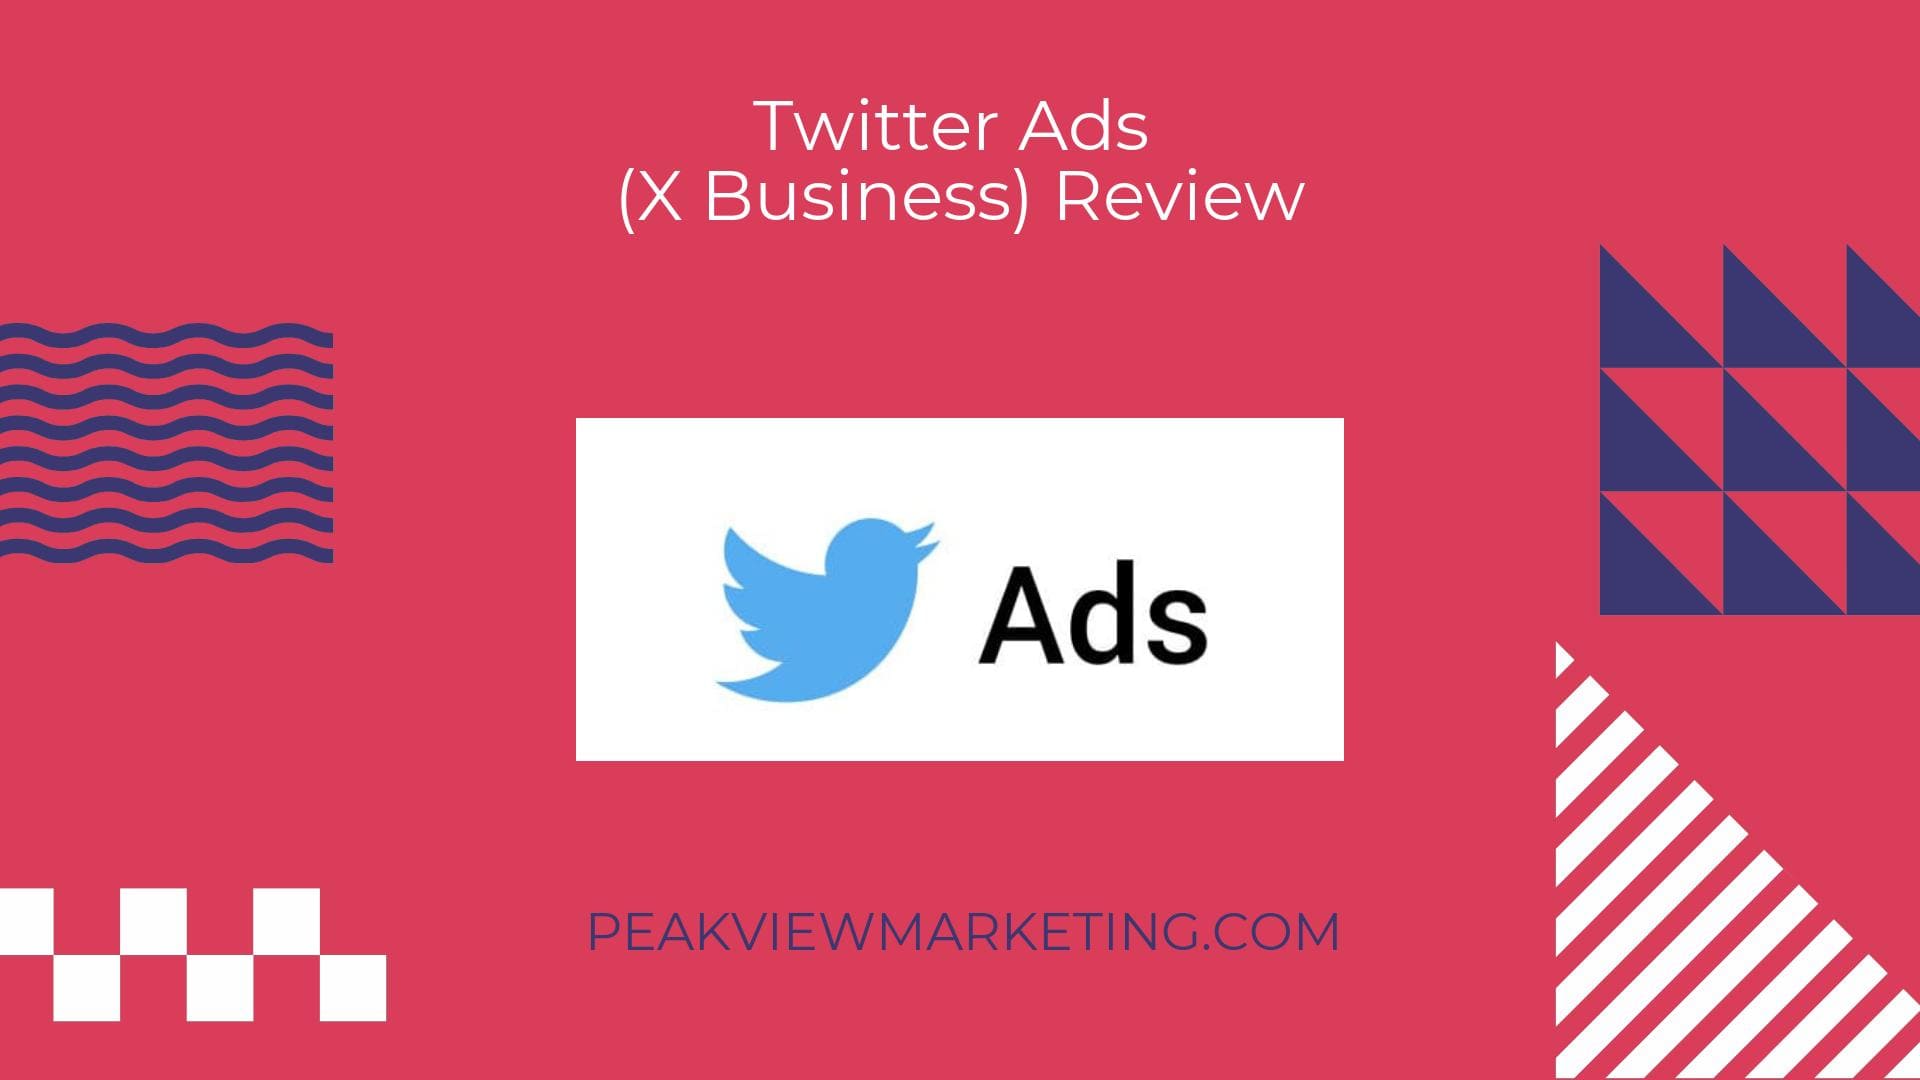 Twitter Ads Review Image